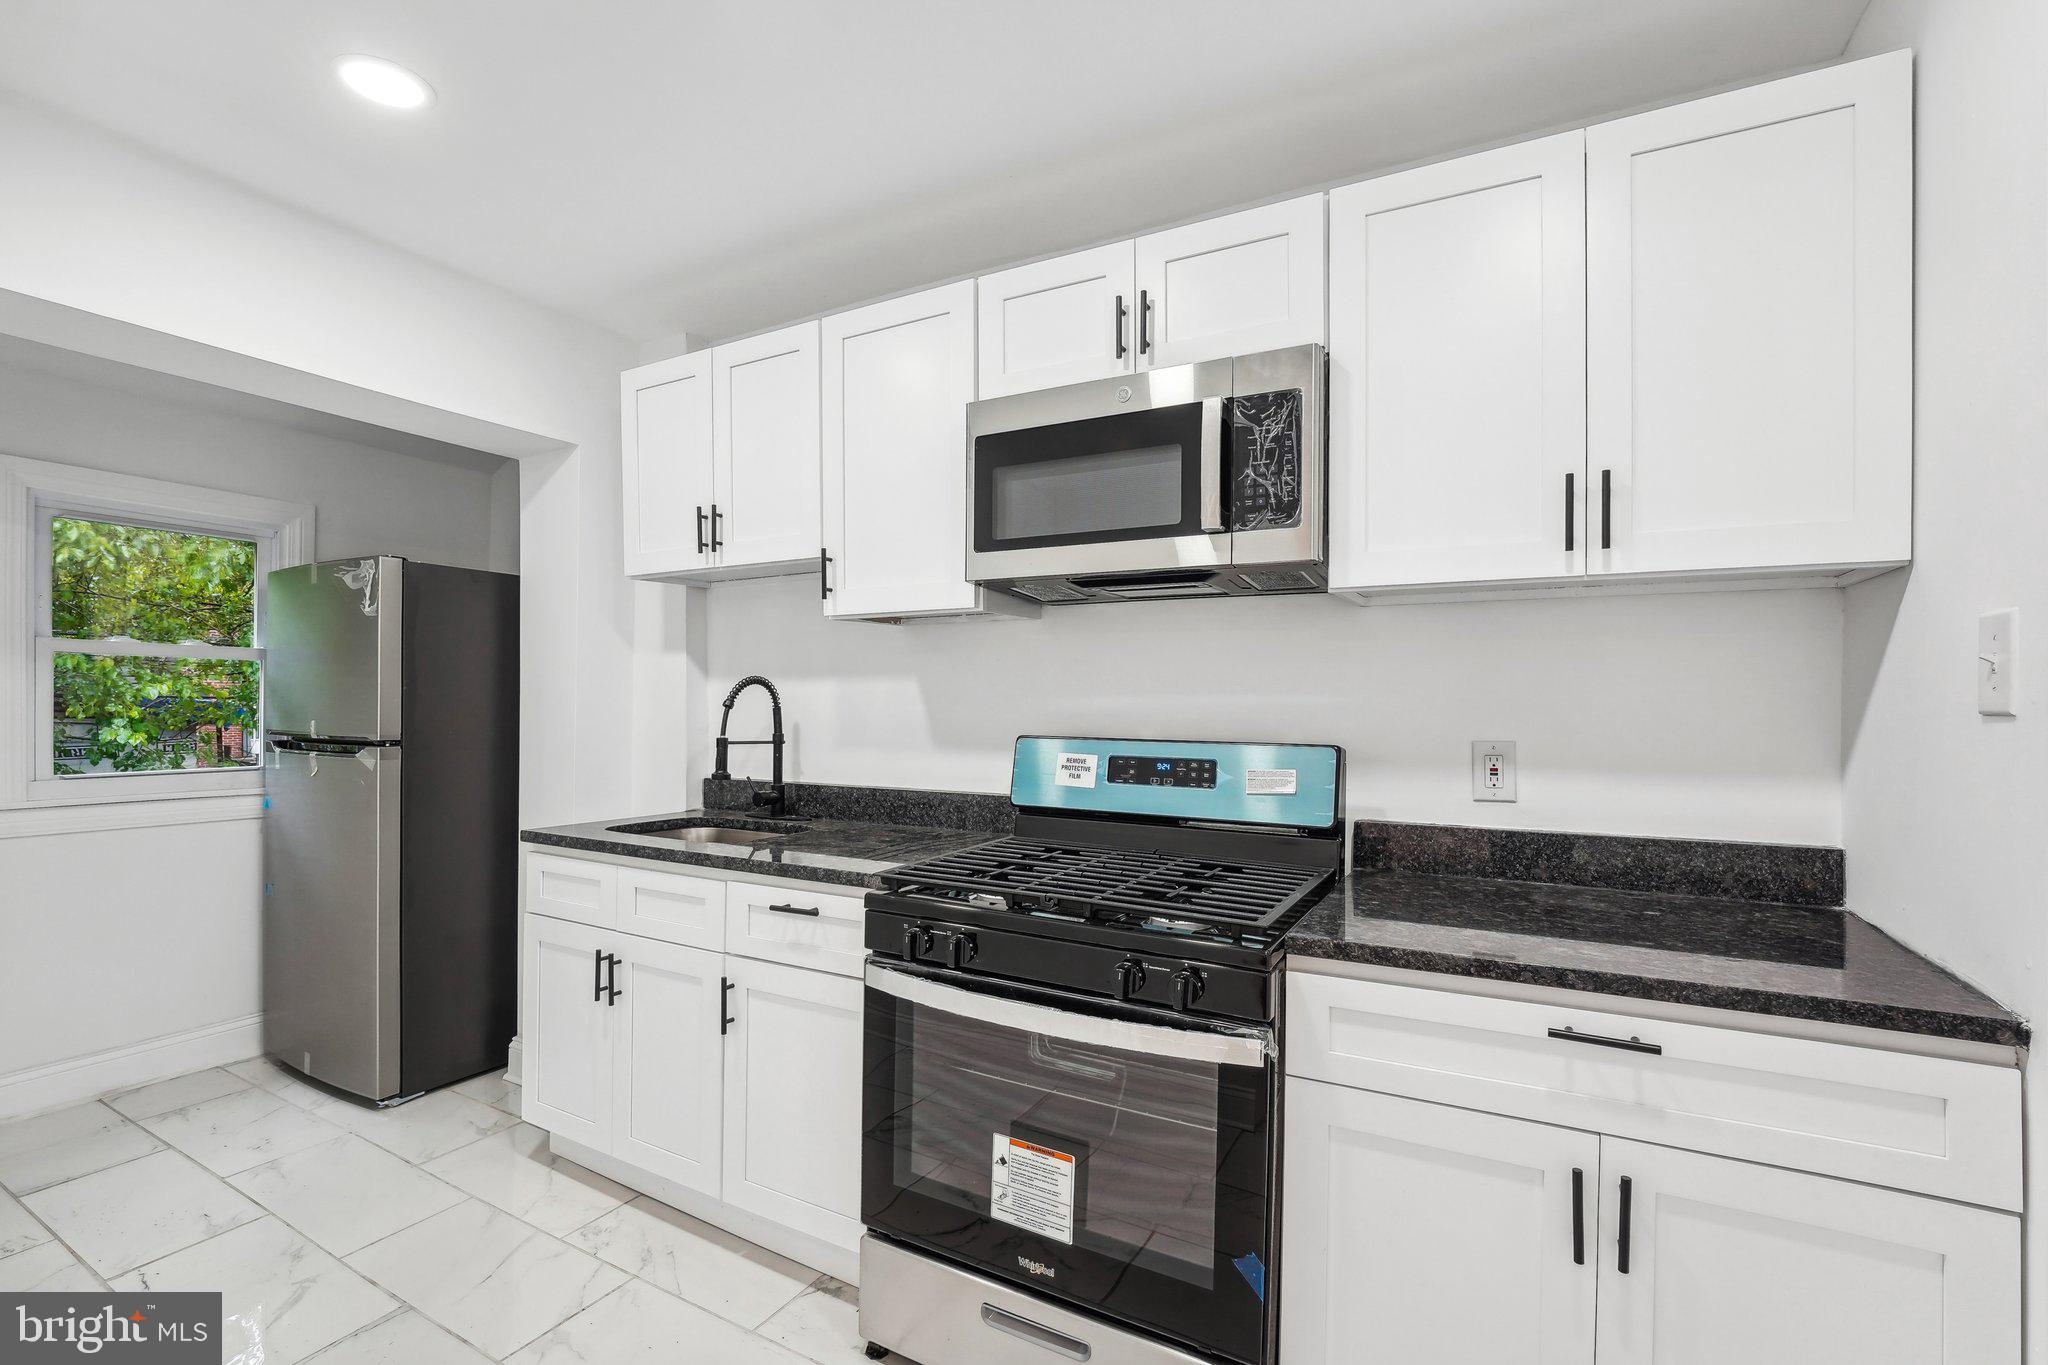 a kitchen with stainless steel appliances granite countertop white cabinets a stove a sink and dishwasher